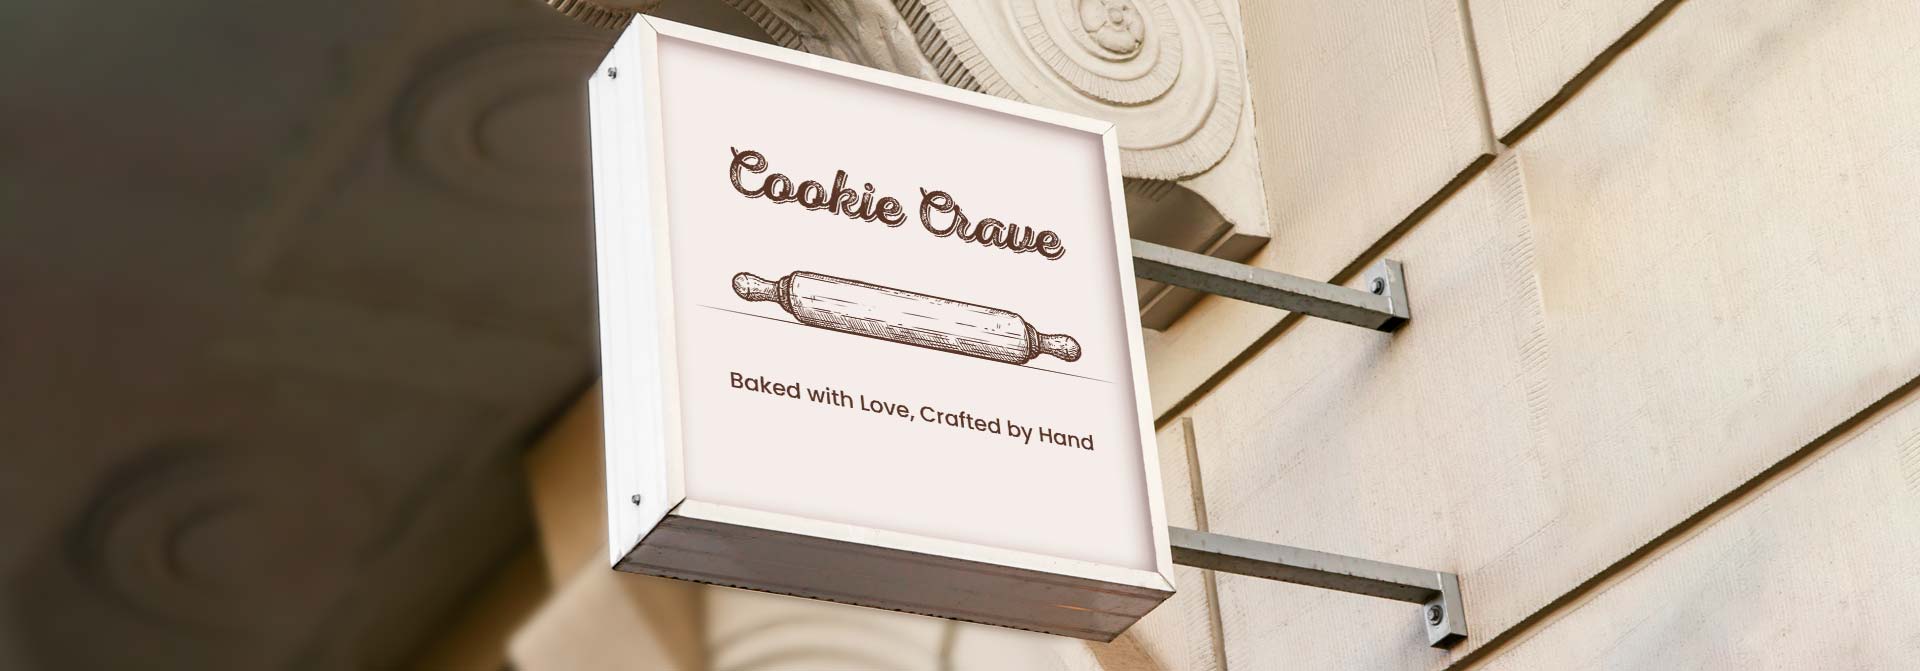 Square bakery signage idea with the brand motto and rolling pin logo